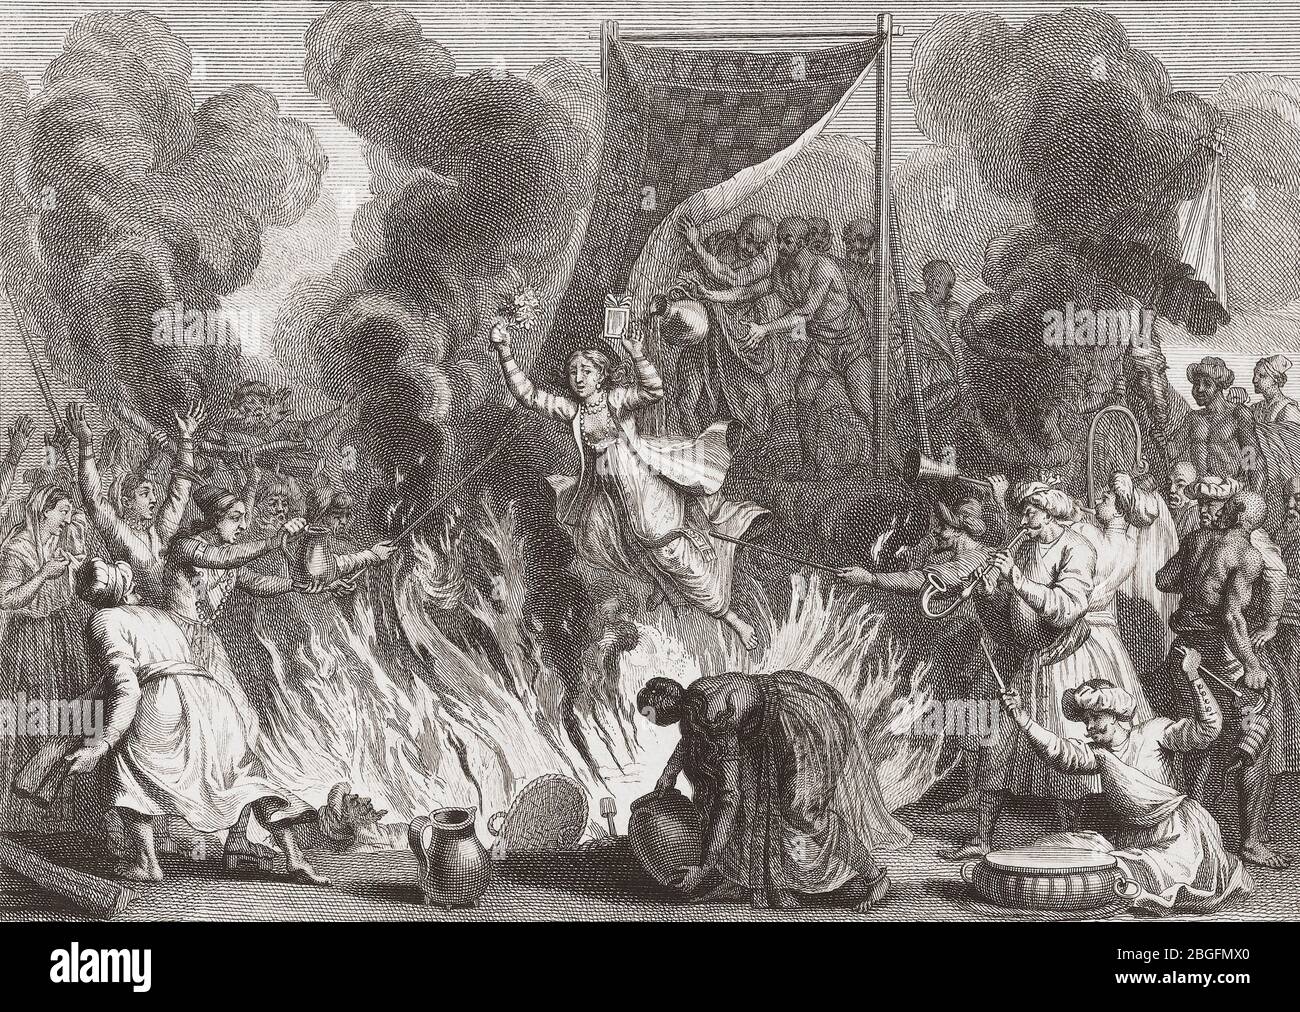 In India, a Hindu woman throws herself into the flames as her husband's body is cremated.   The practice of a widow joining her dead husband in death is called Sati or Suttee.  A less common form of Sati was for the widow to be buried alive with her dead husband.  Sati in any form is now illegal.  After an 18th century work by Bernard Picart. Stock Photo